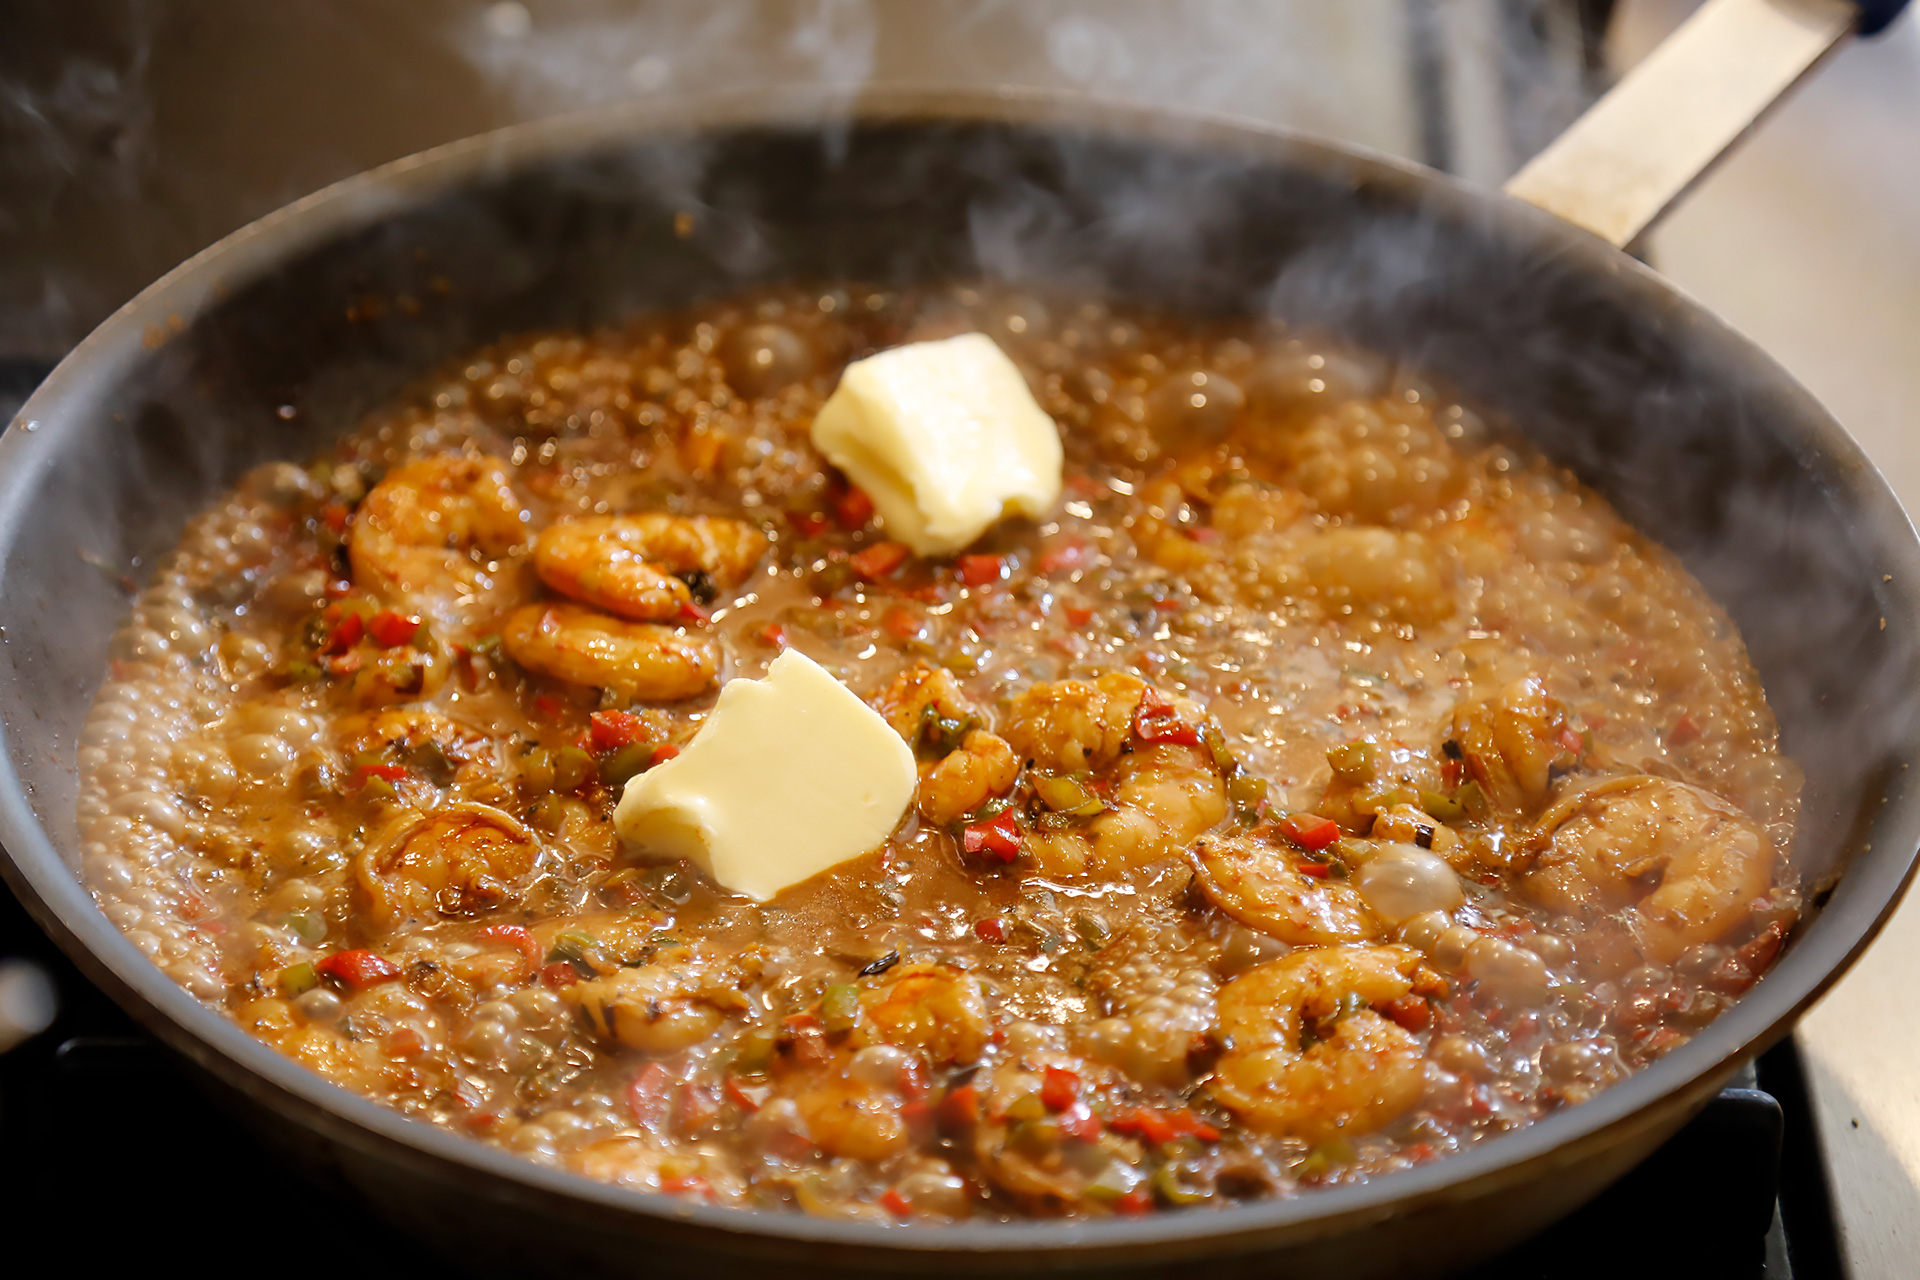 Add Creole sauce and cream, and bring to a simmer. When shrimp are cooked through, add butter and lemon juice.